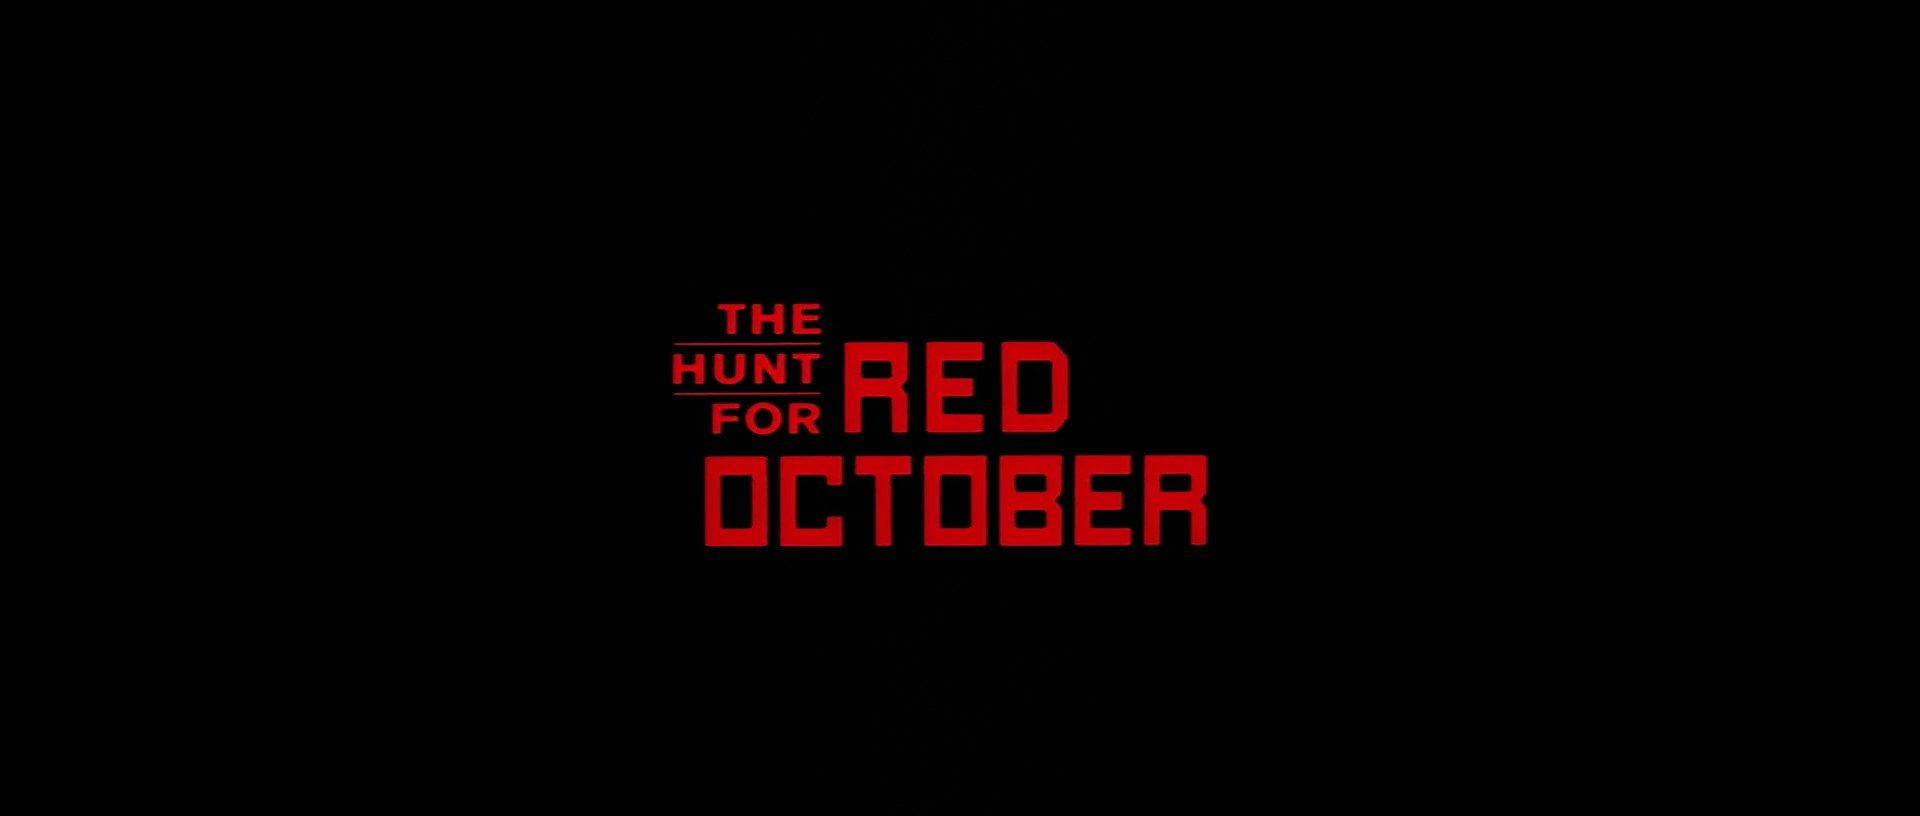 Red October Logo - Image - The Hunt for Red October Logo.jpg | Film and Television ...